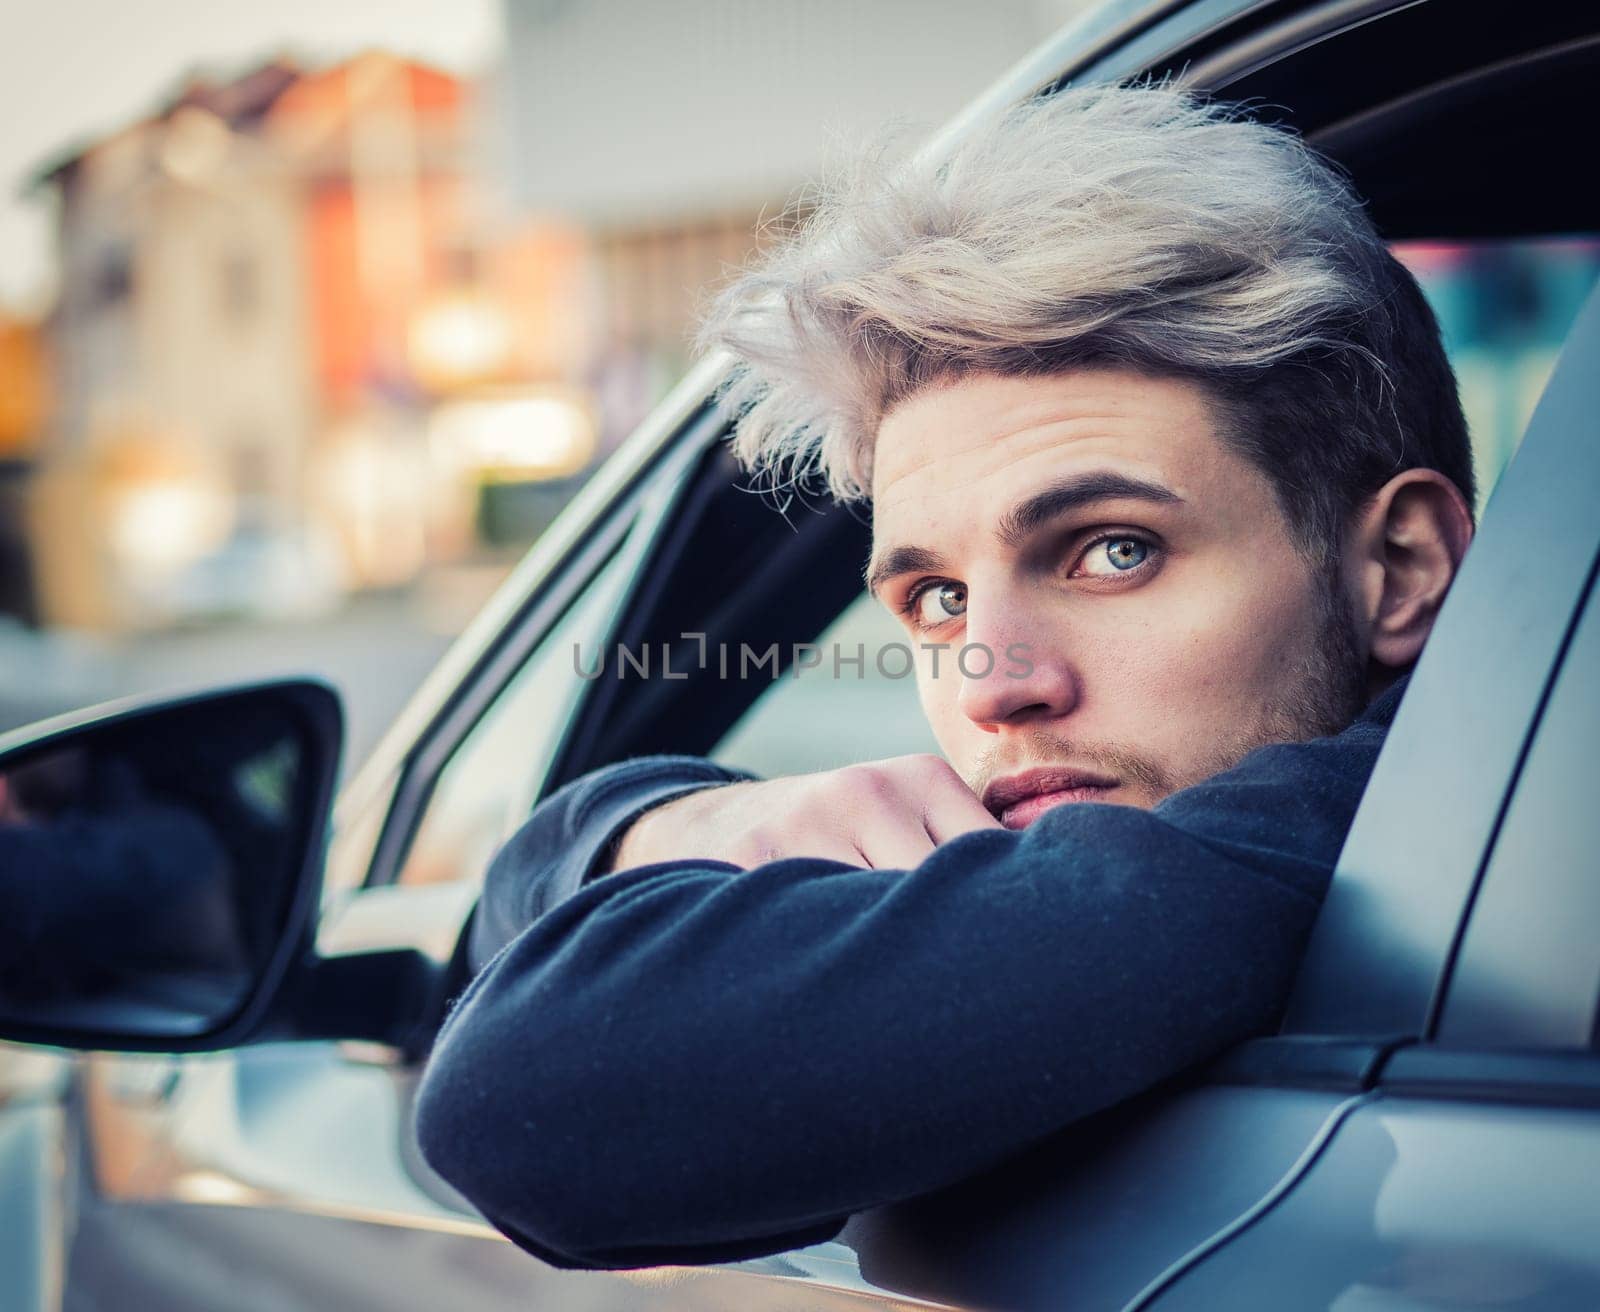 Photo of a man leaning out of a car window by artofphoto